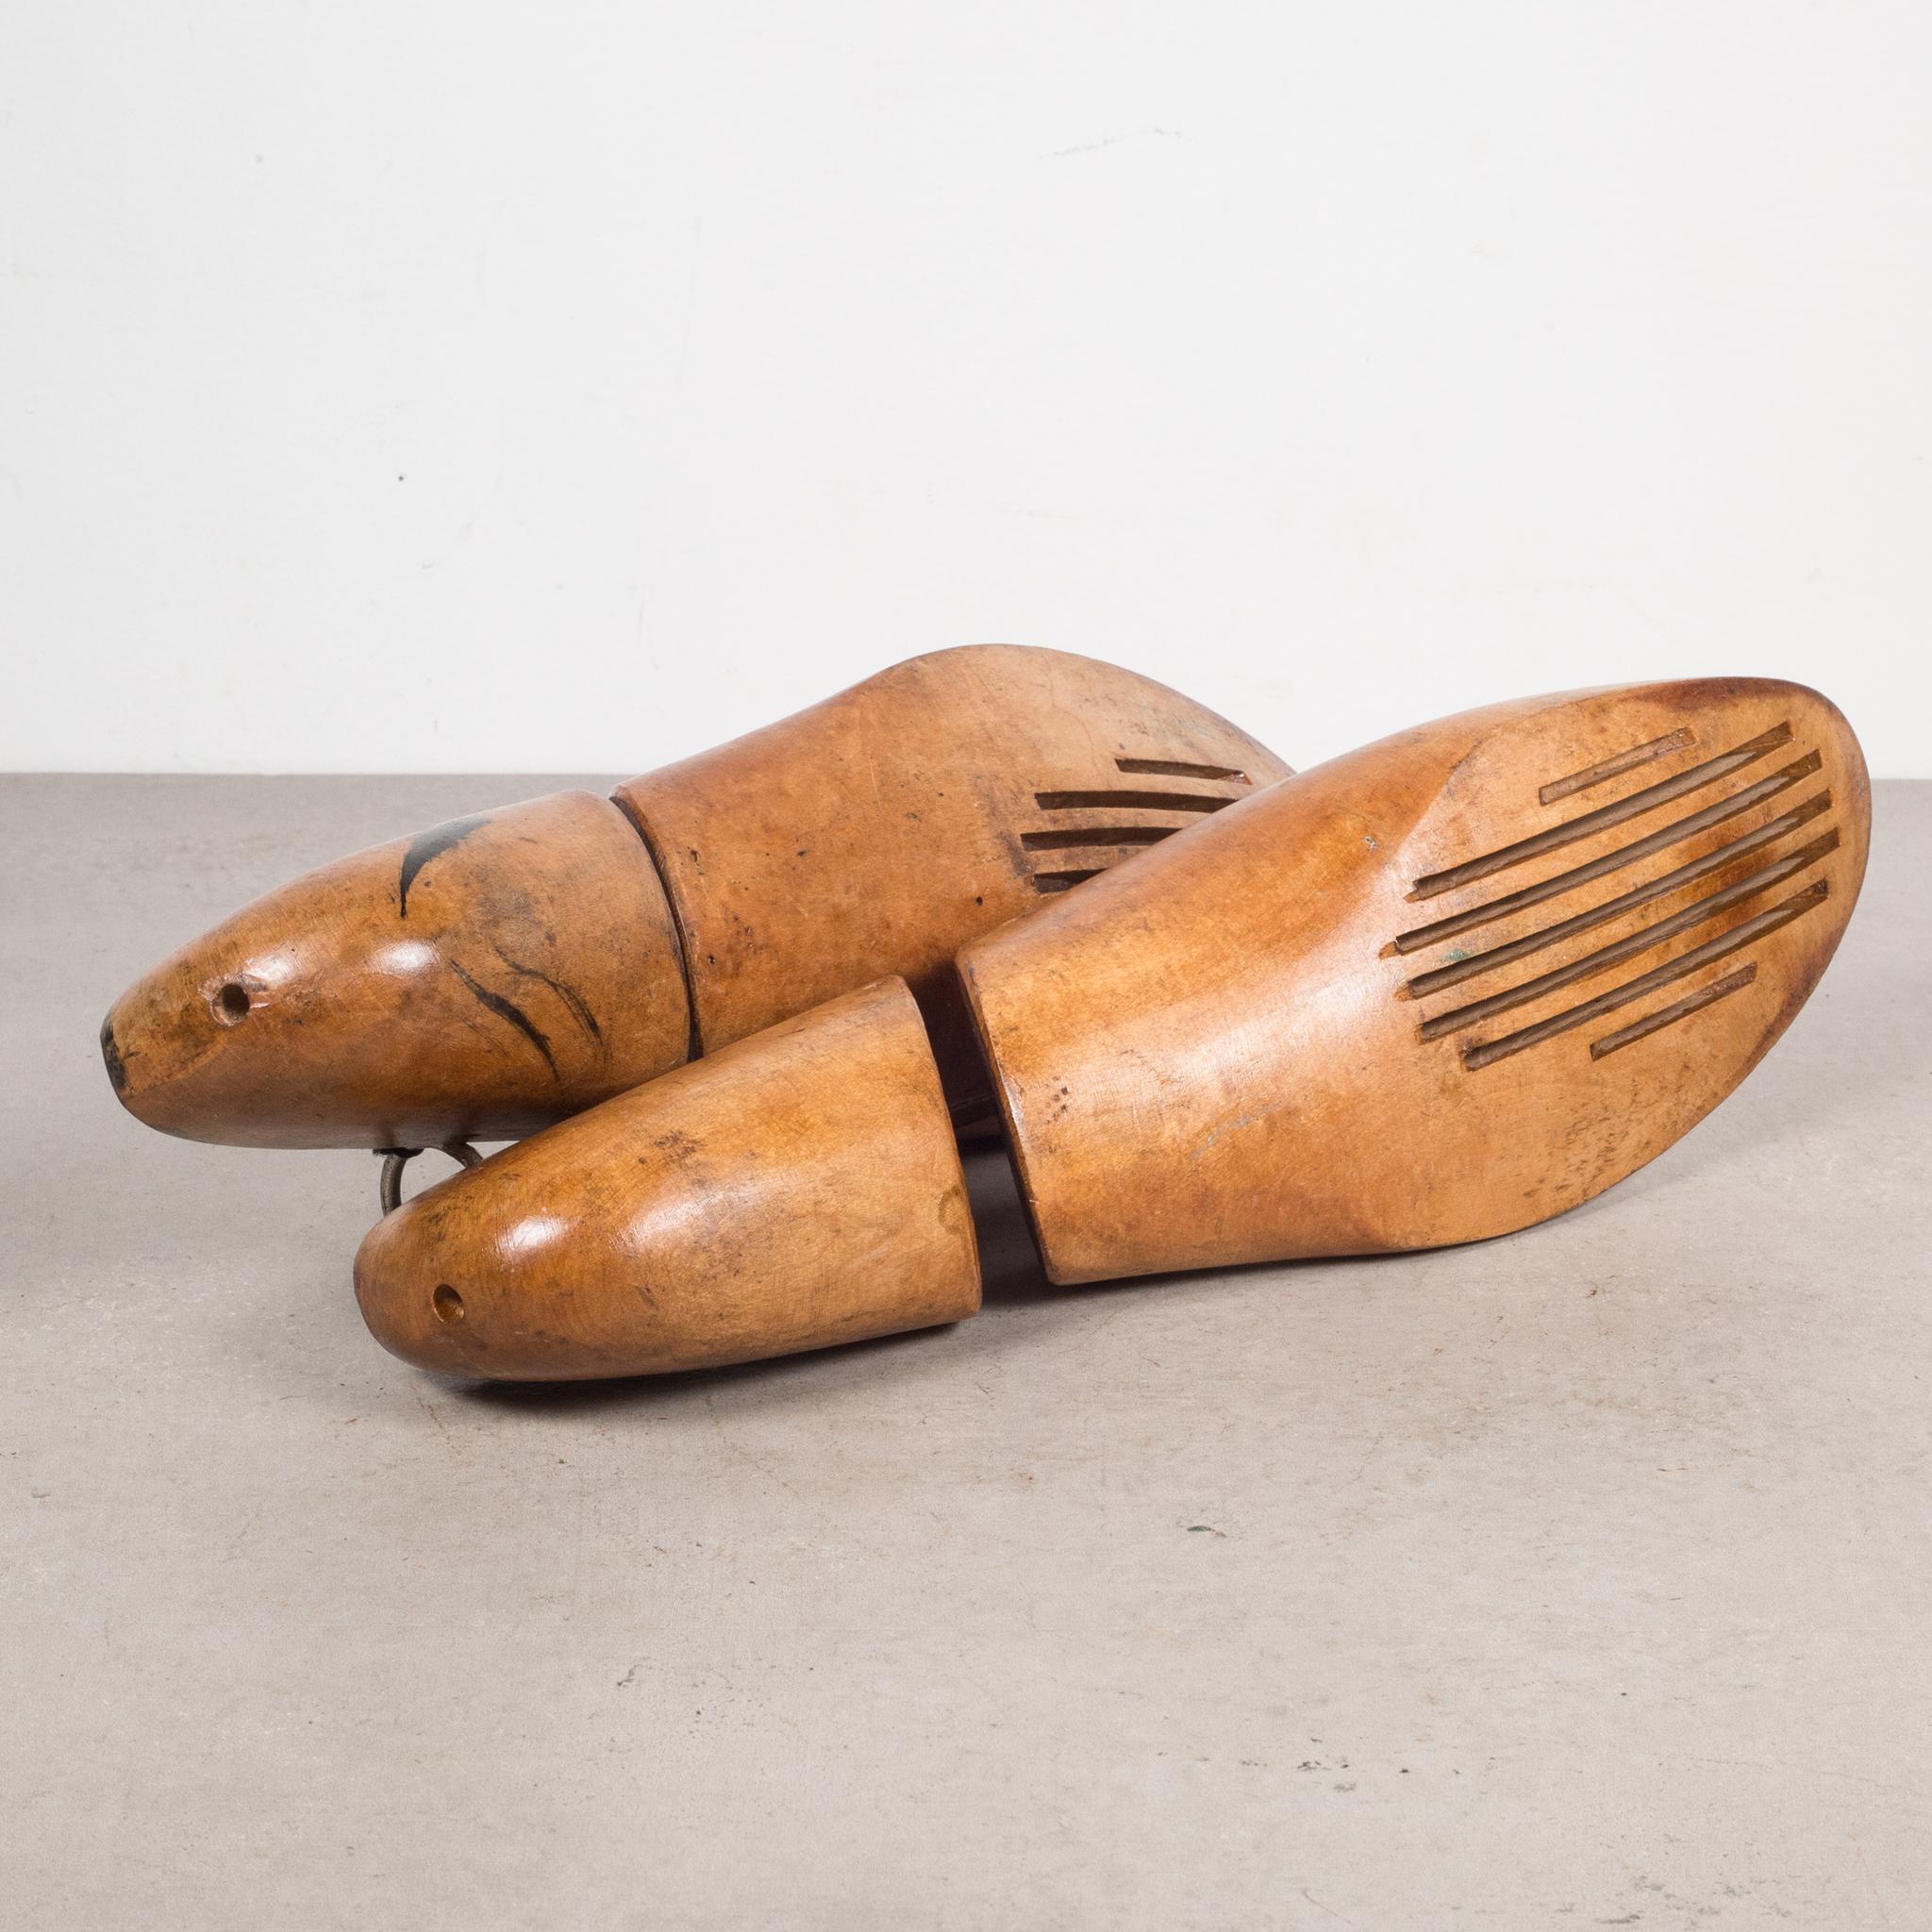 Industrial Antique Wooden Shoe Forms with Handles c.1920 For Sale